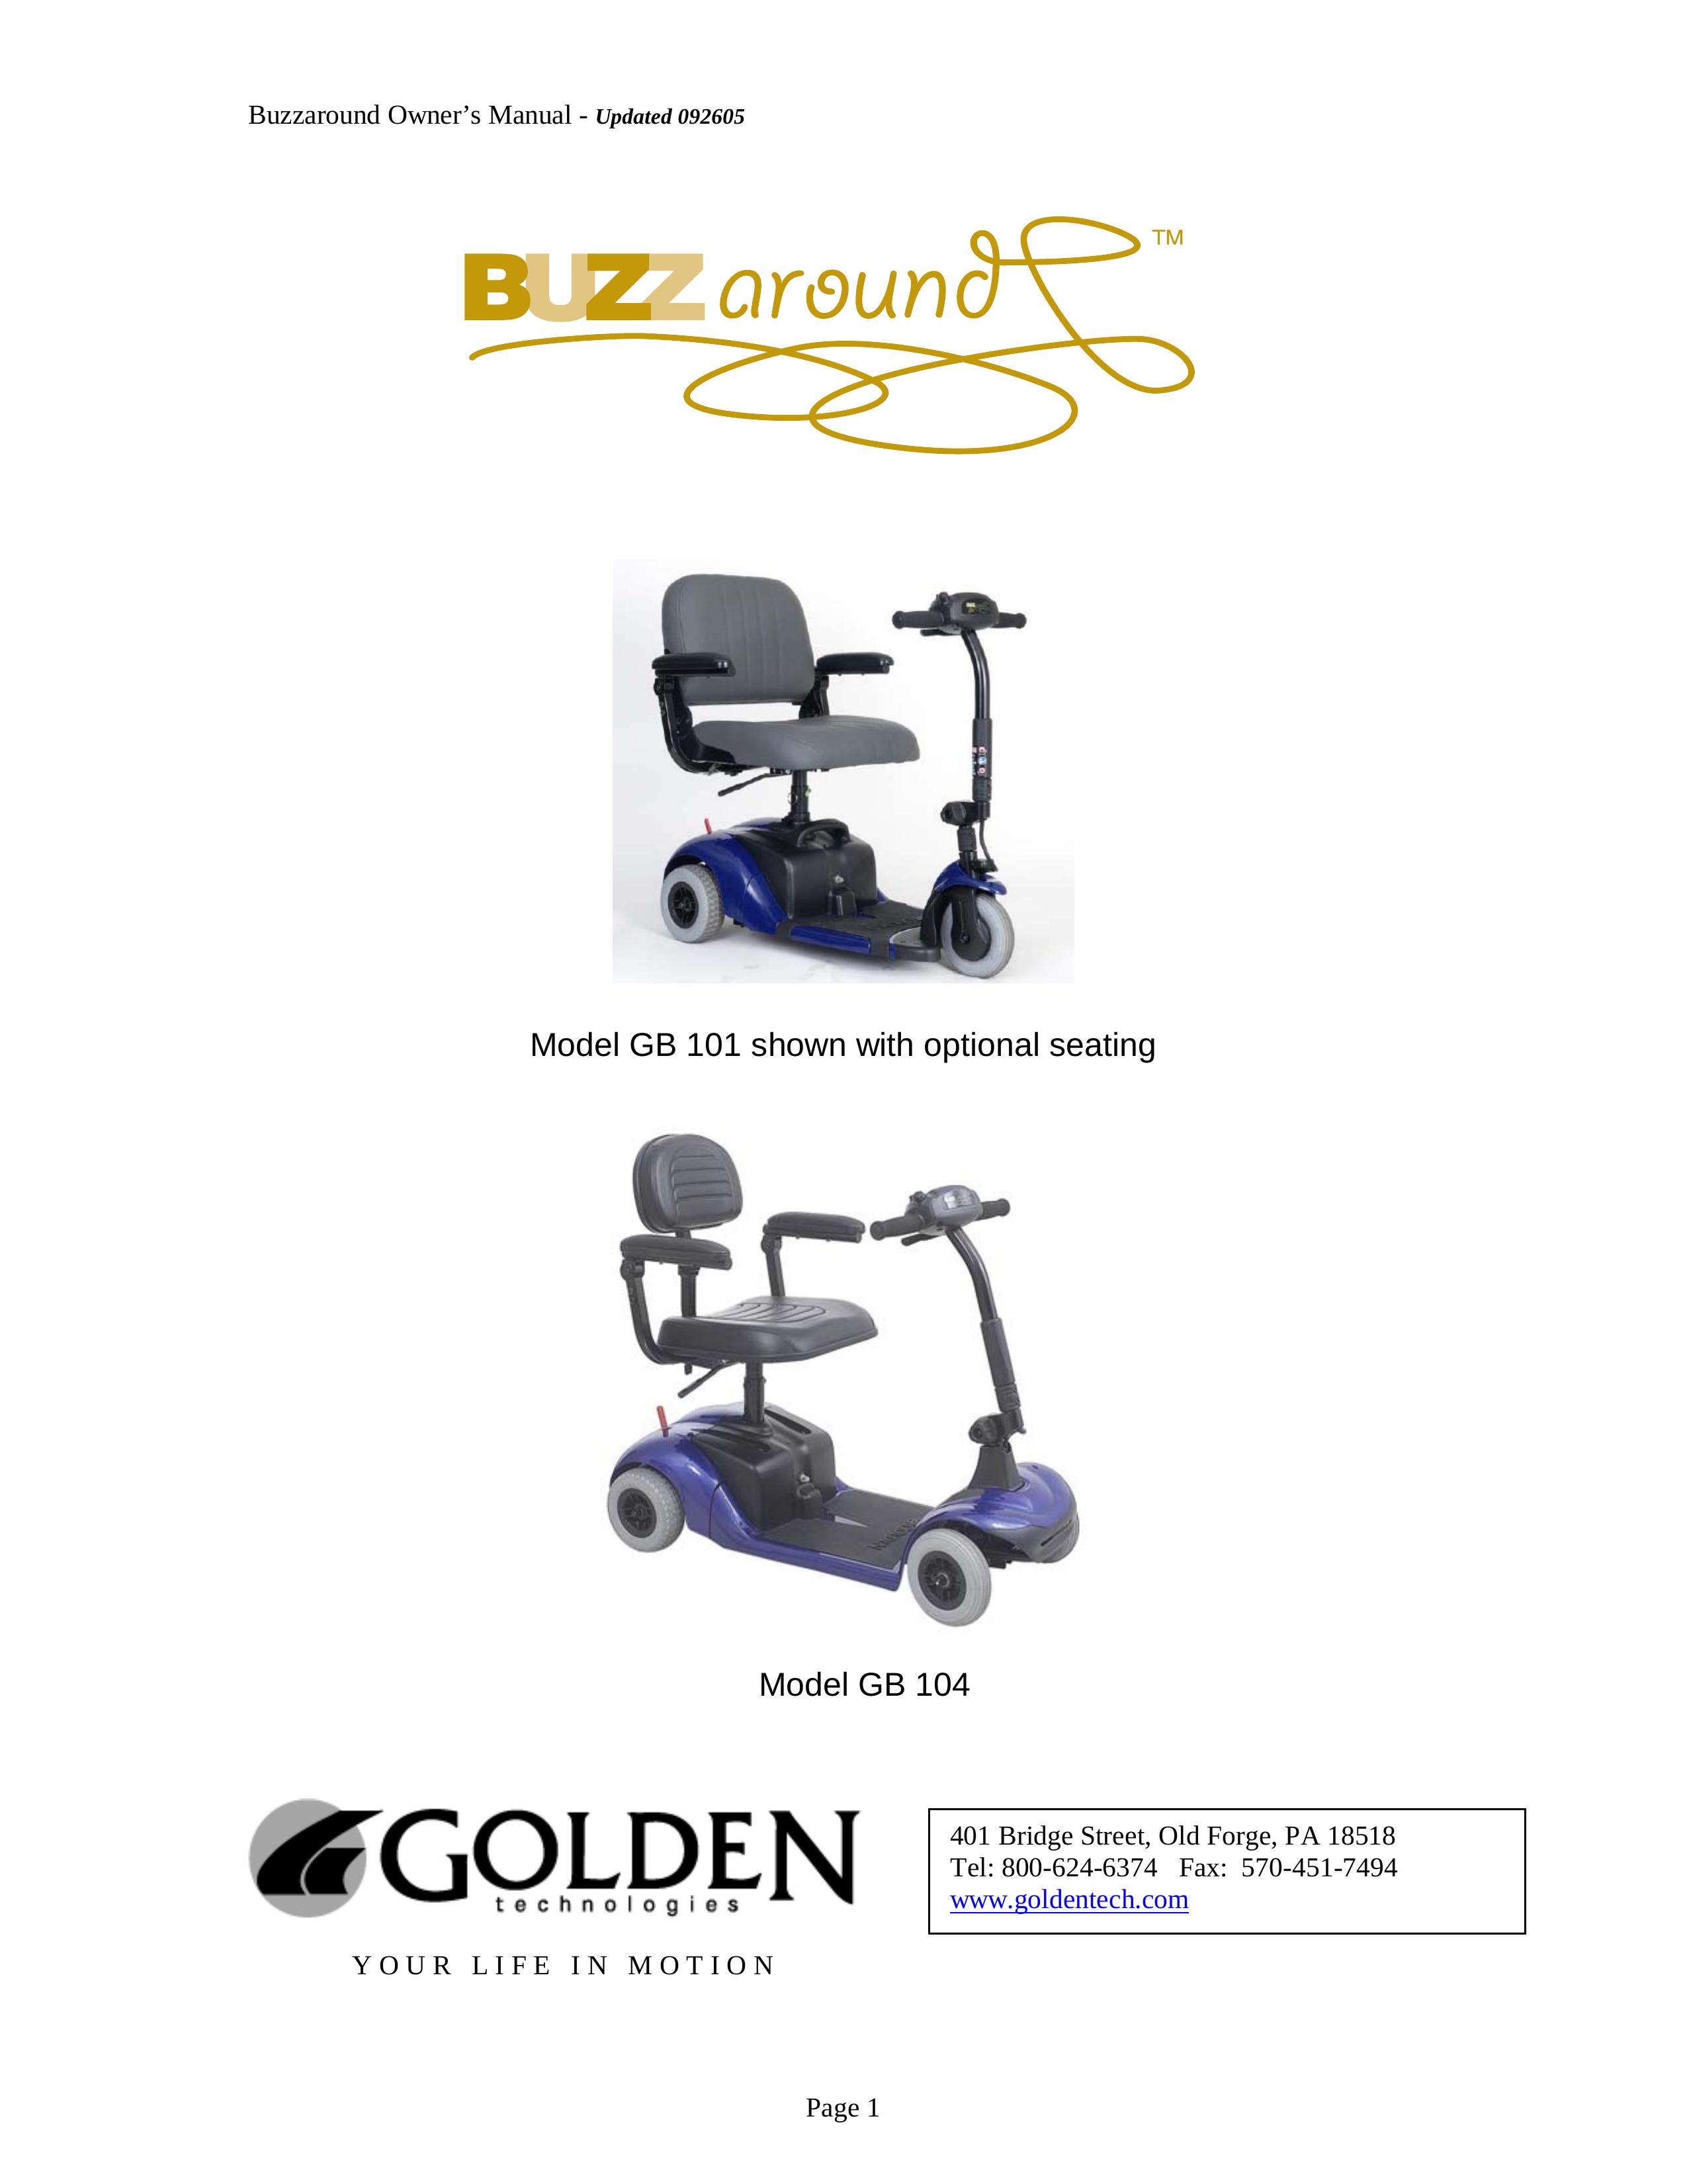 Golden Technologies GB 104 Mobility Aid User Manual